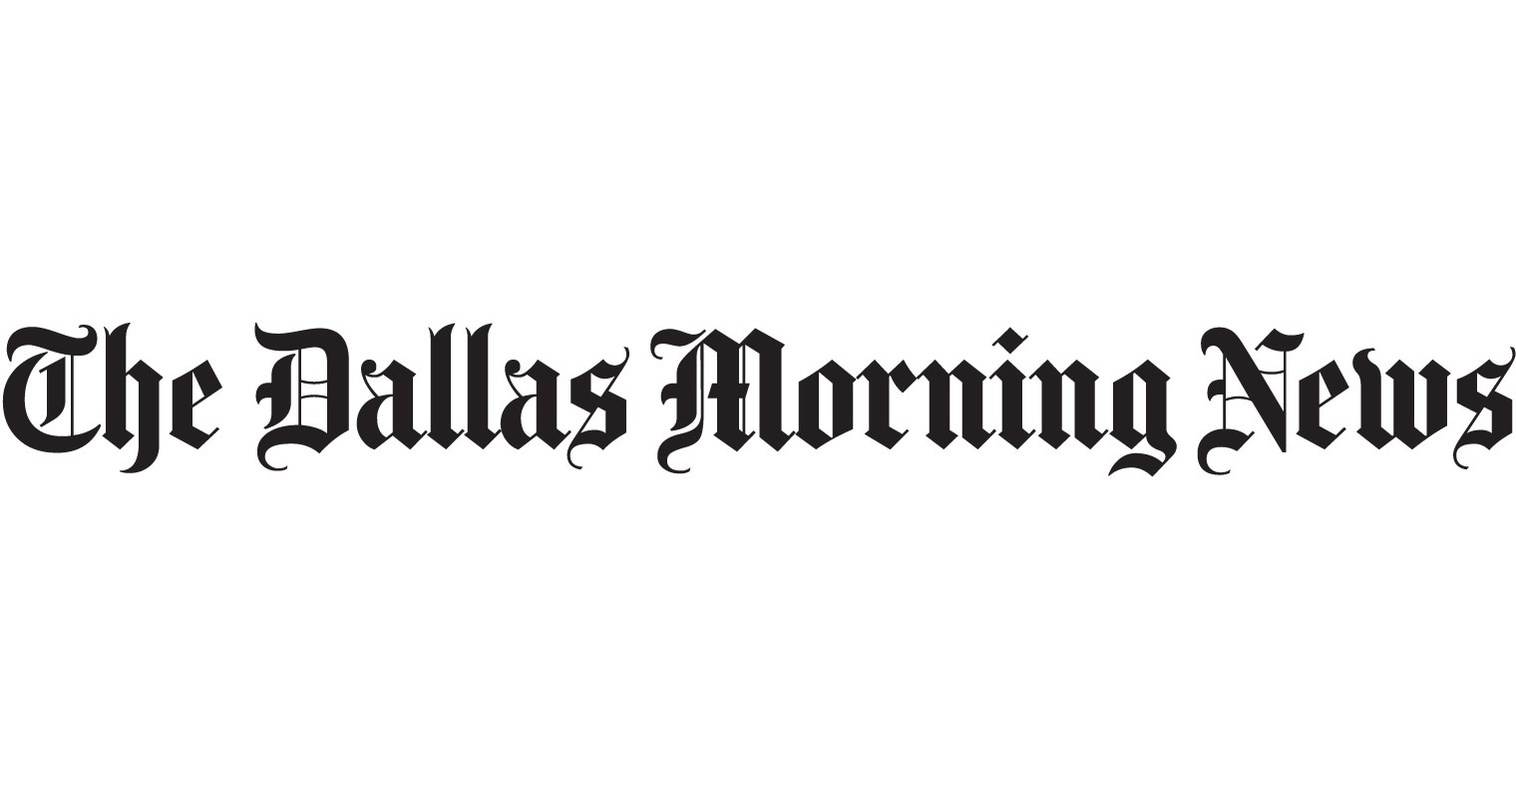 Dallas Morning News: Man convicted of murder at Muslim-owned tire shop in Dallas faces hate-crime charges